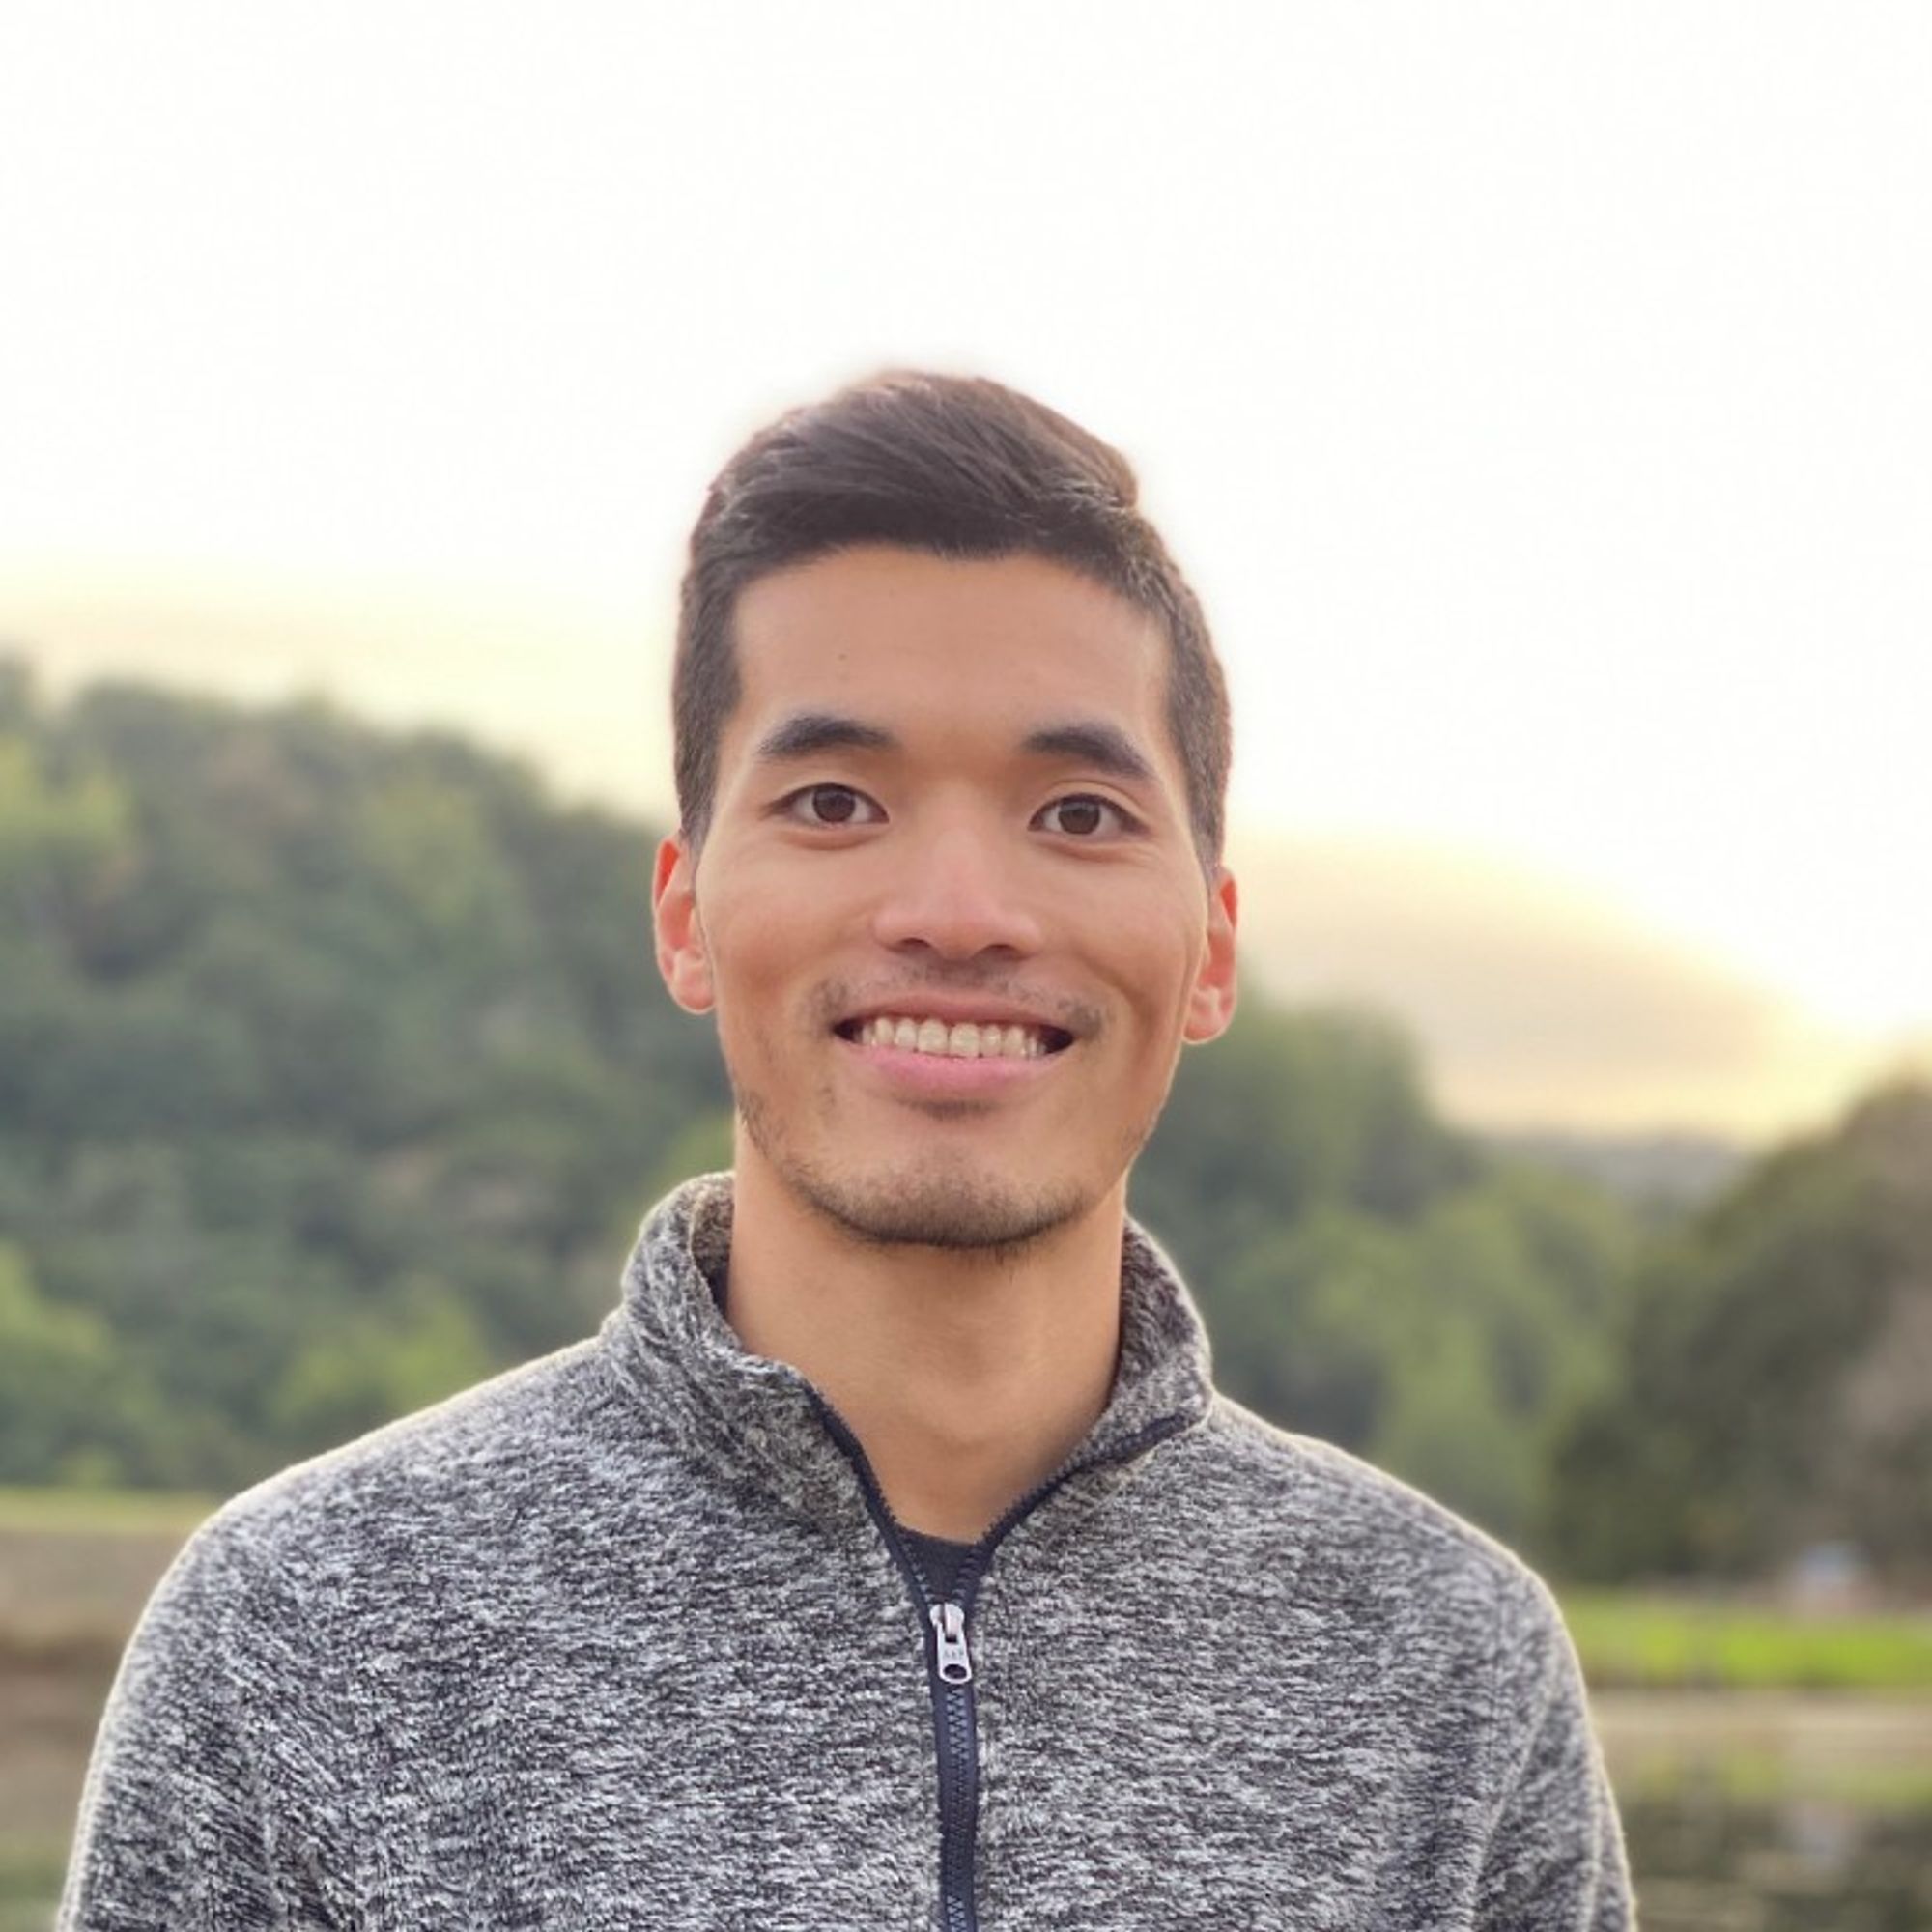 Hai Nguyen
Software Engineer
Former Eng at Blend, Google • Big fan of soccer, coffee and animals short videos